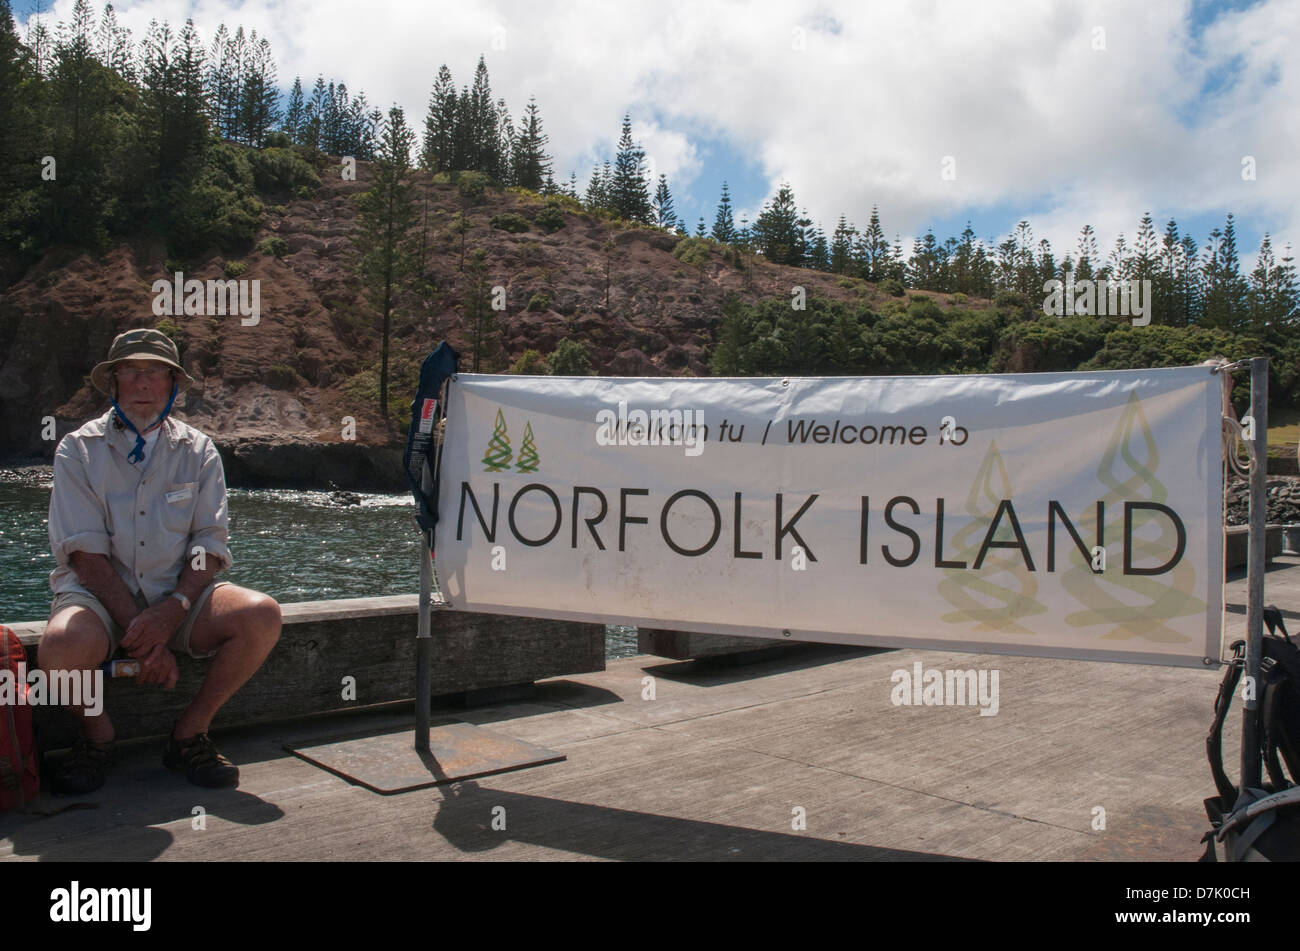 Welcome banner on the historic Kingston Pier at Norfolk Island, incorporating the island language Norf'k Stock Photo